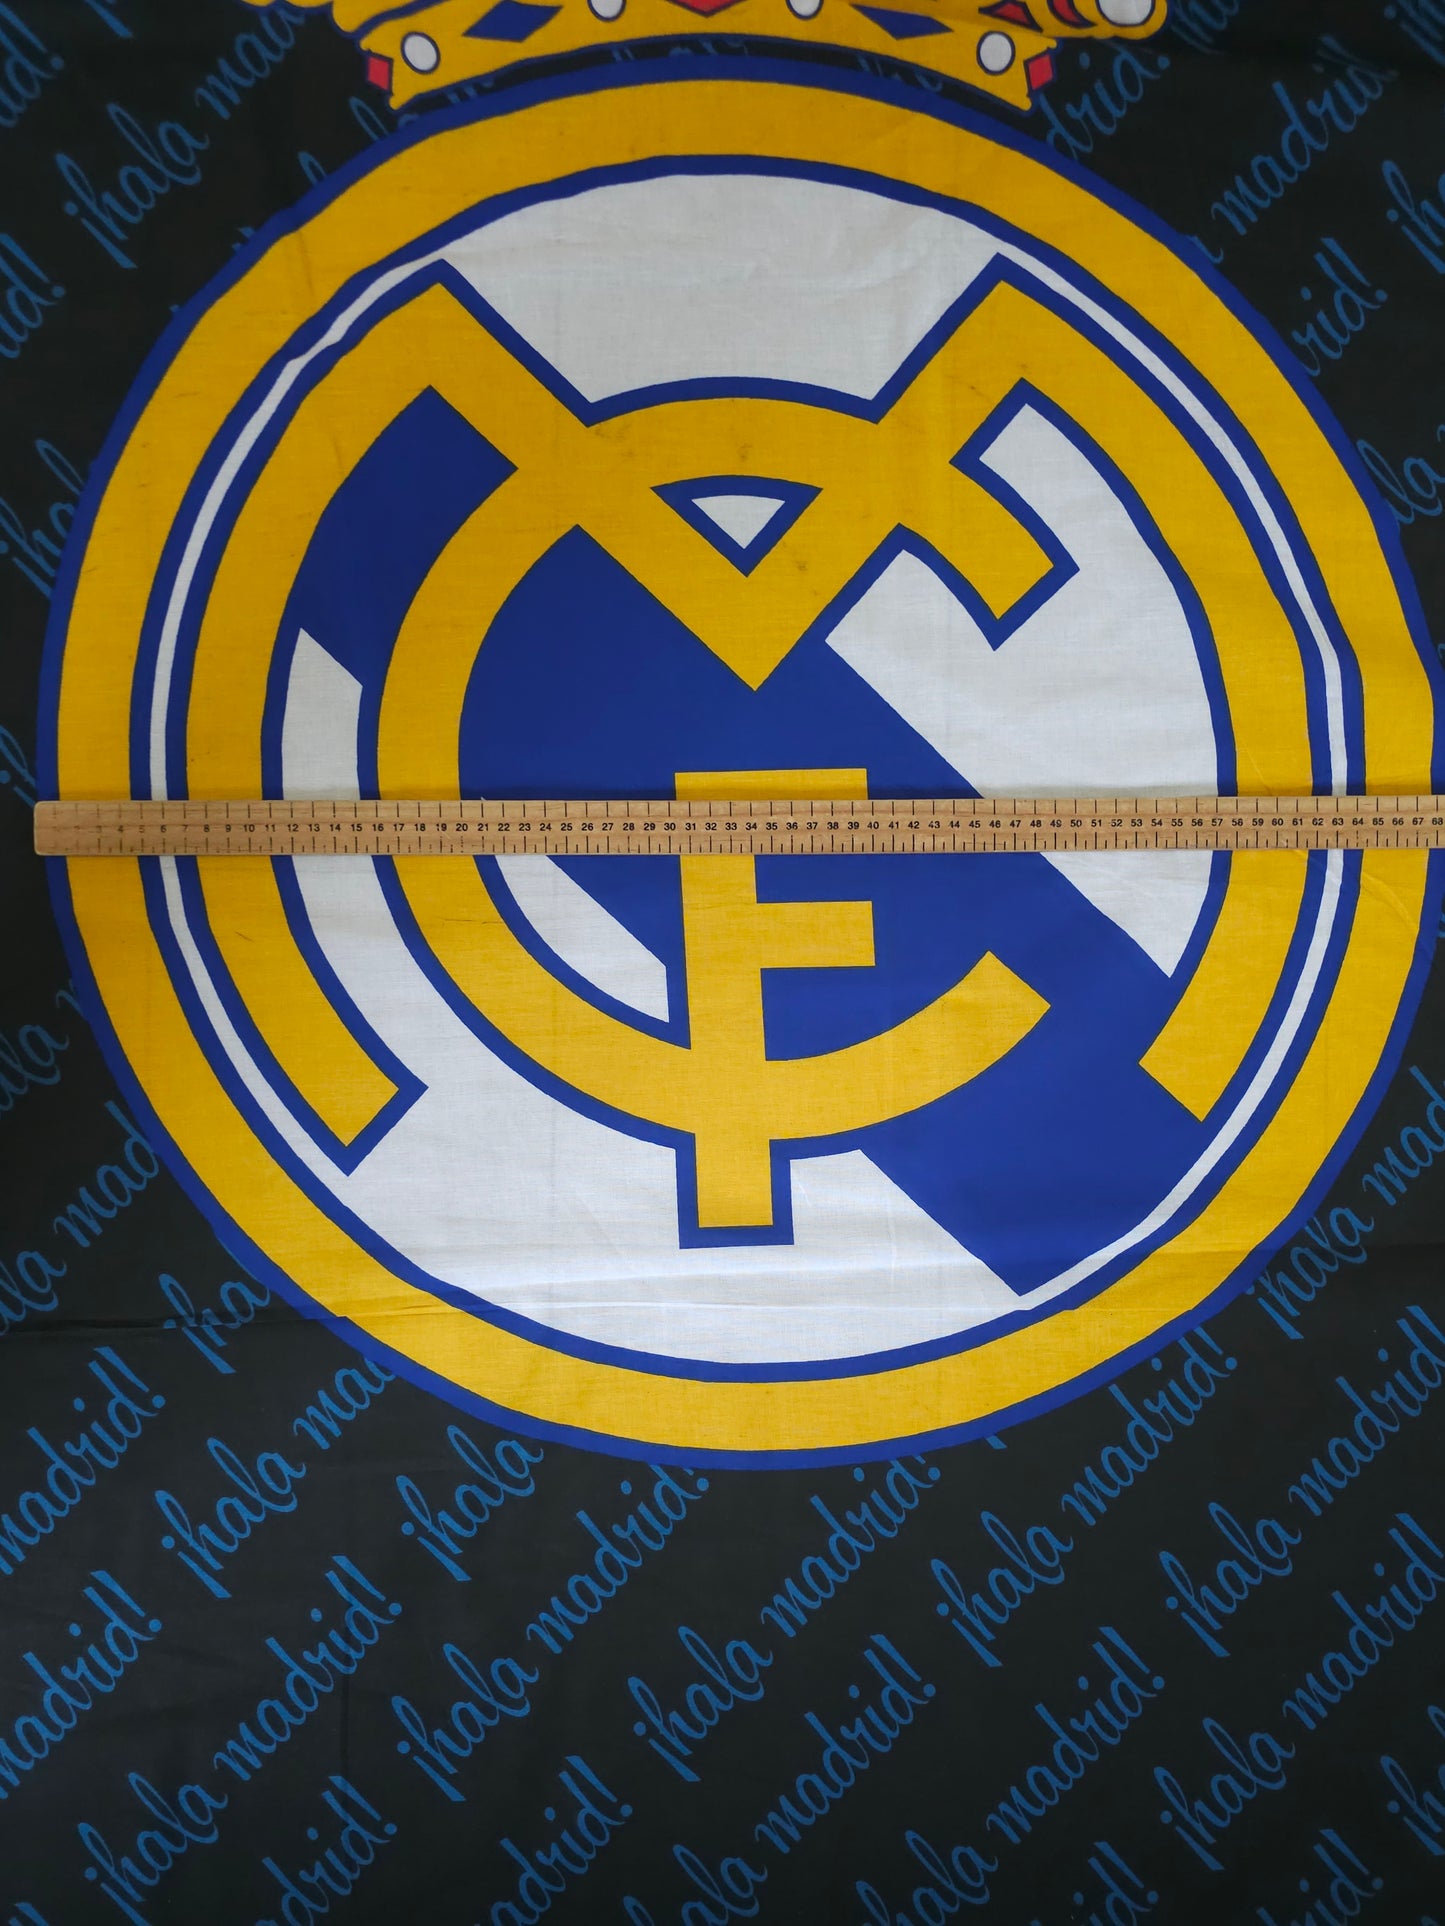 Real Madrid FC 100% Cotton Football Fabric *DEFECTED*